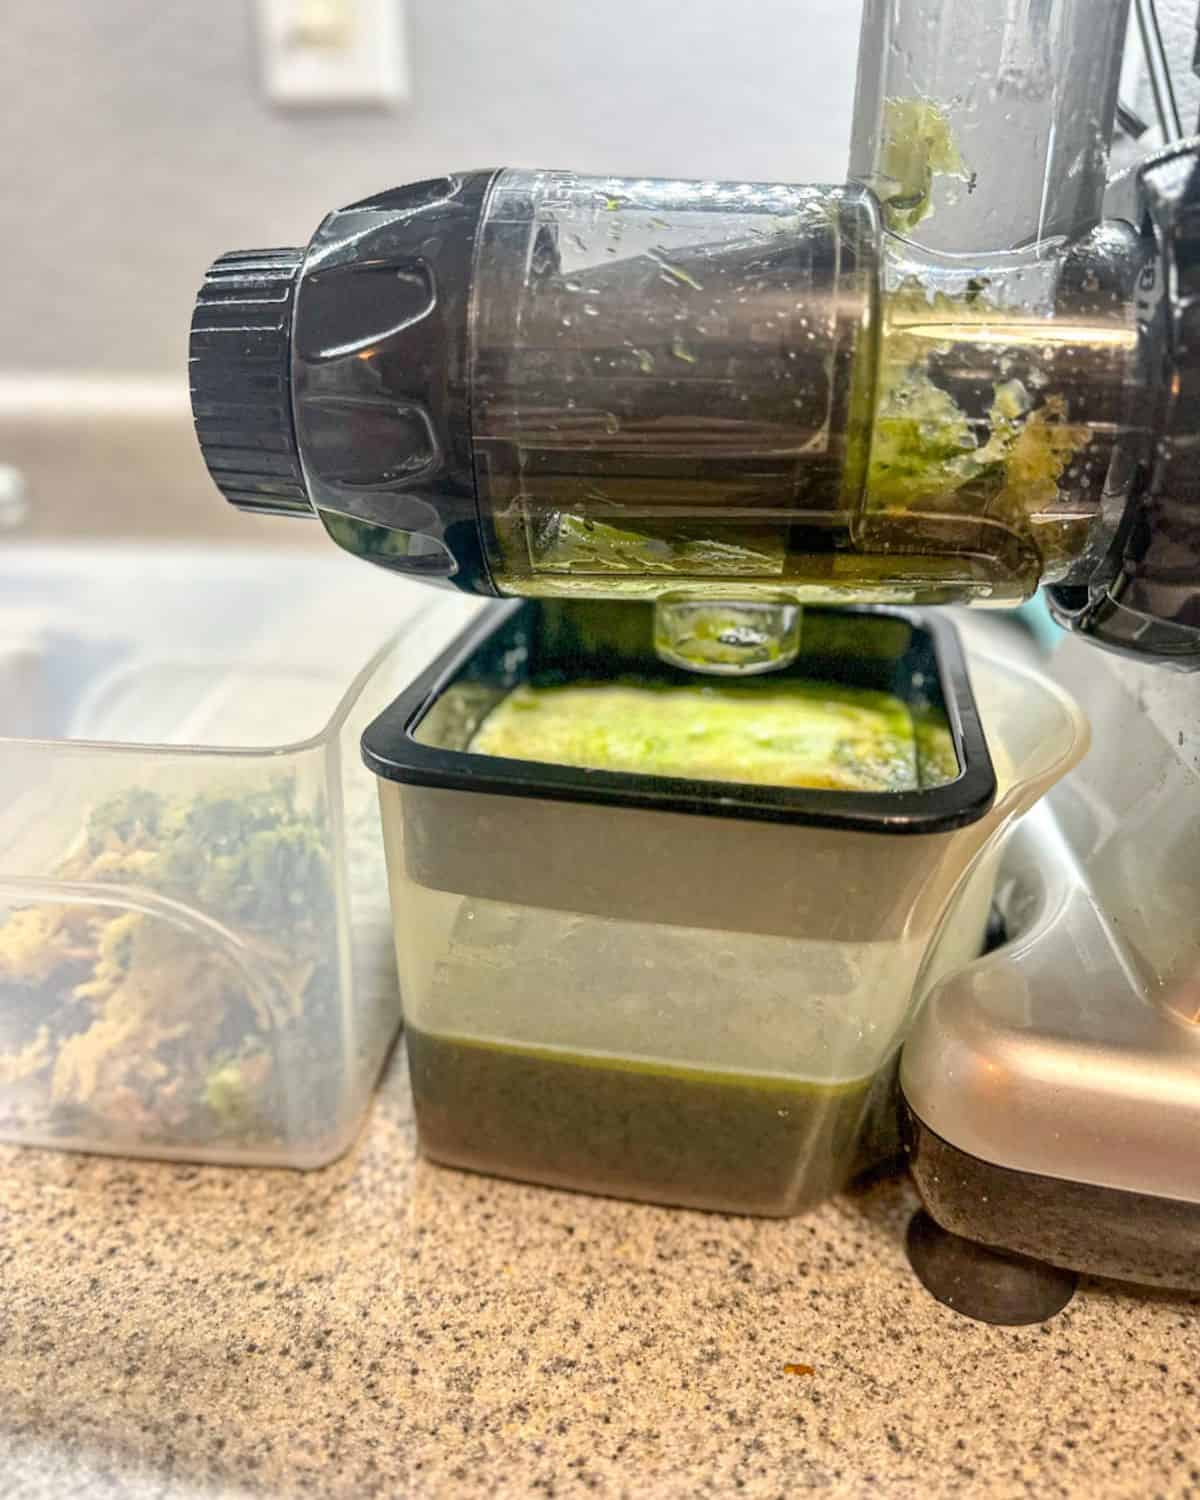 A close-up of the neck and mouth of a juicer with a full container of juice ready to stir and serve. Also visible is the foam in the fine mesh filter and the pulp in the catching container next to the pitcher.